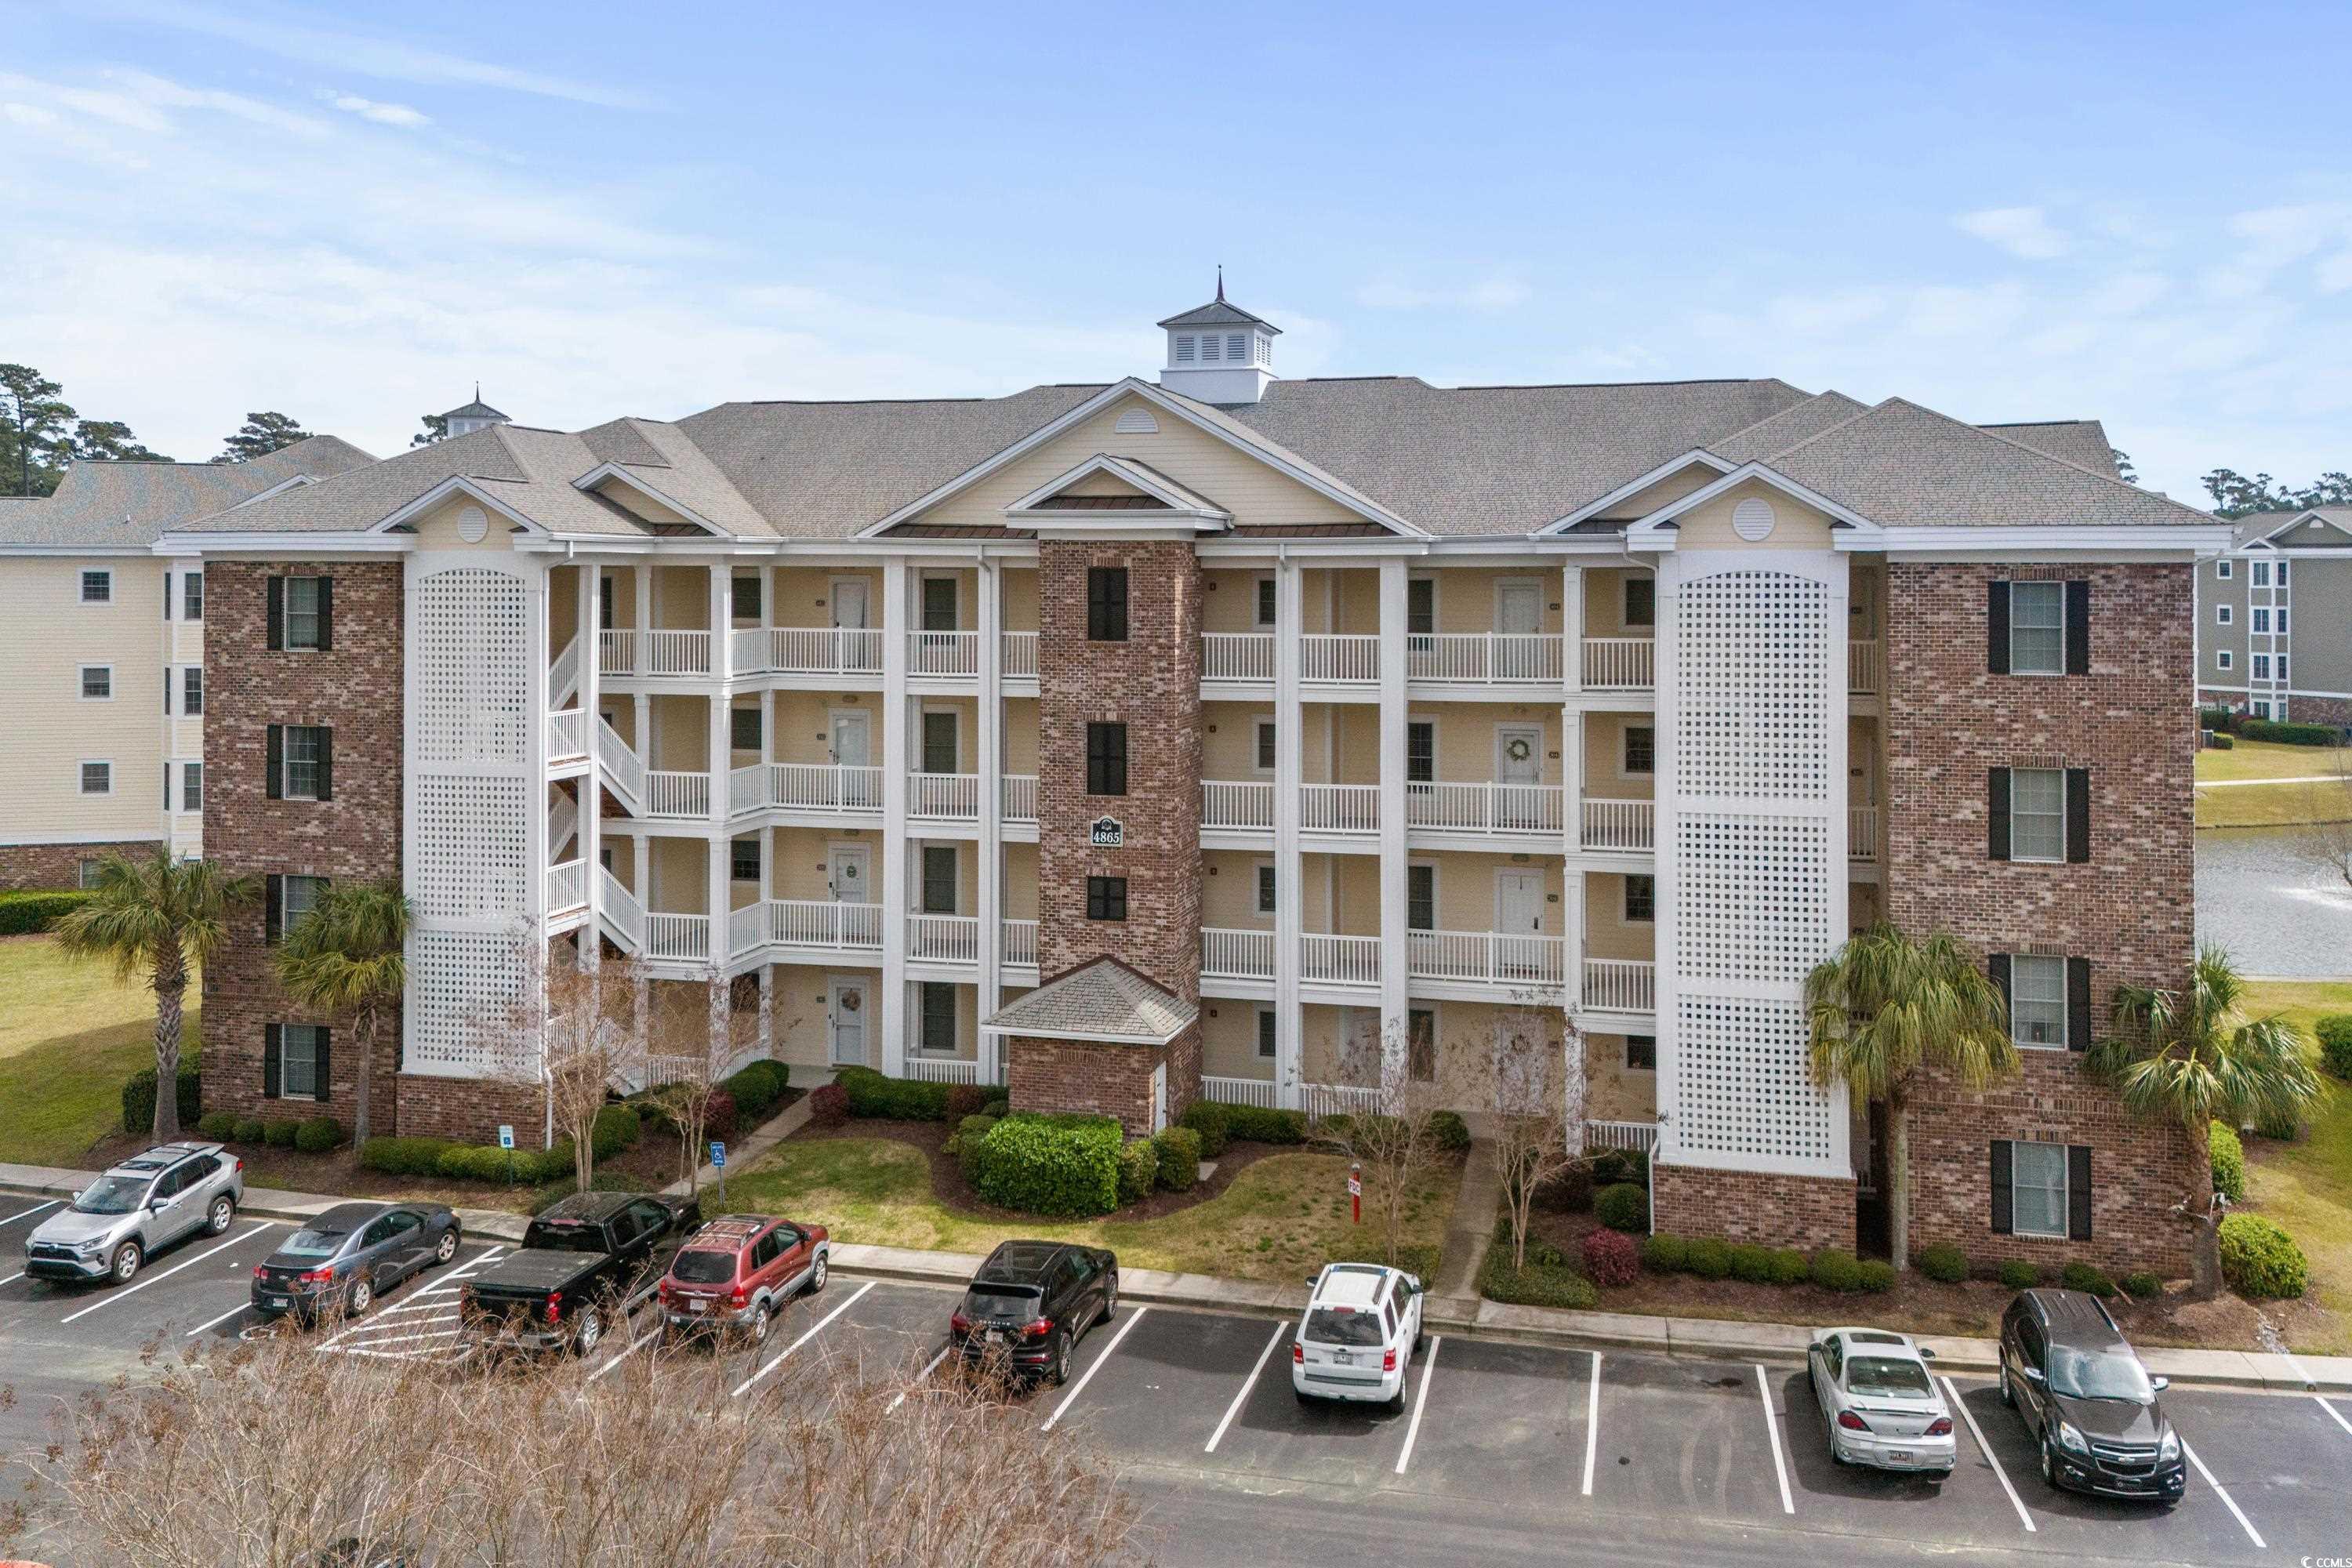 this 2 bed 2 bath well maintained golf villa provides you the comfort and luxury you and your guests deserve after a day at the beach, walking the boardwalk or an enjoyable day on the golf course. located within minutes of everything you come to enjoy in myrtle beach! this condo has been recently updated with new luxury vinyl plank (lvp) flooring, fresh coat of paint, new microwave and a new water heater (required to be replaced every 10 years by the hoa keep in mind when looking at other units). it also comes fully furnished so you can have your toes in the sand or a tee time booked right after your closing, no moving trucks needed!  enjoy your morning coffee on your sun drenched 3rd floor balcony over looking a large pond with a fountain. the balcony has the popular e-z breeze enclosure system.  you can either slide the window panels up or down to allow the gentle beach breeze blow through or keep all the panels closed and stay dry on those rare rainy days.  don't miss your chance to own a piece of paradise in the most popular and growing area in the country! schedule your showing today and start living the coastal lifestyle you've always dreamed of!